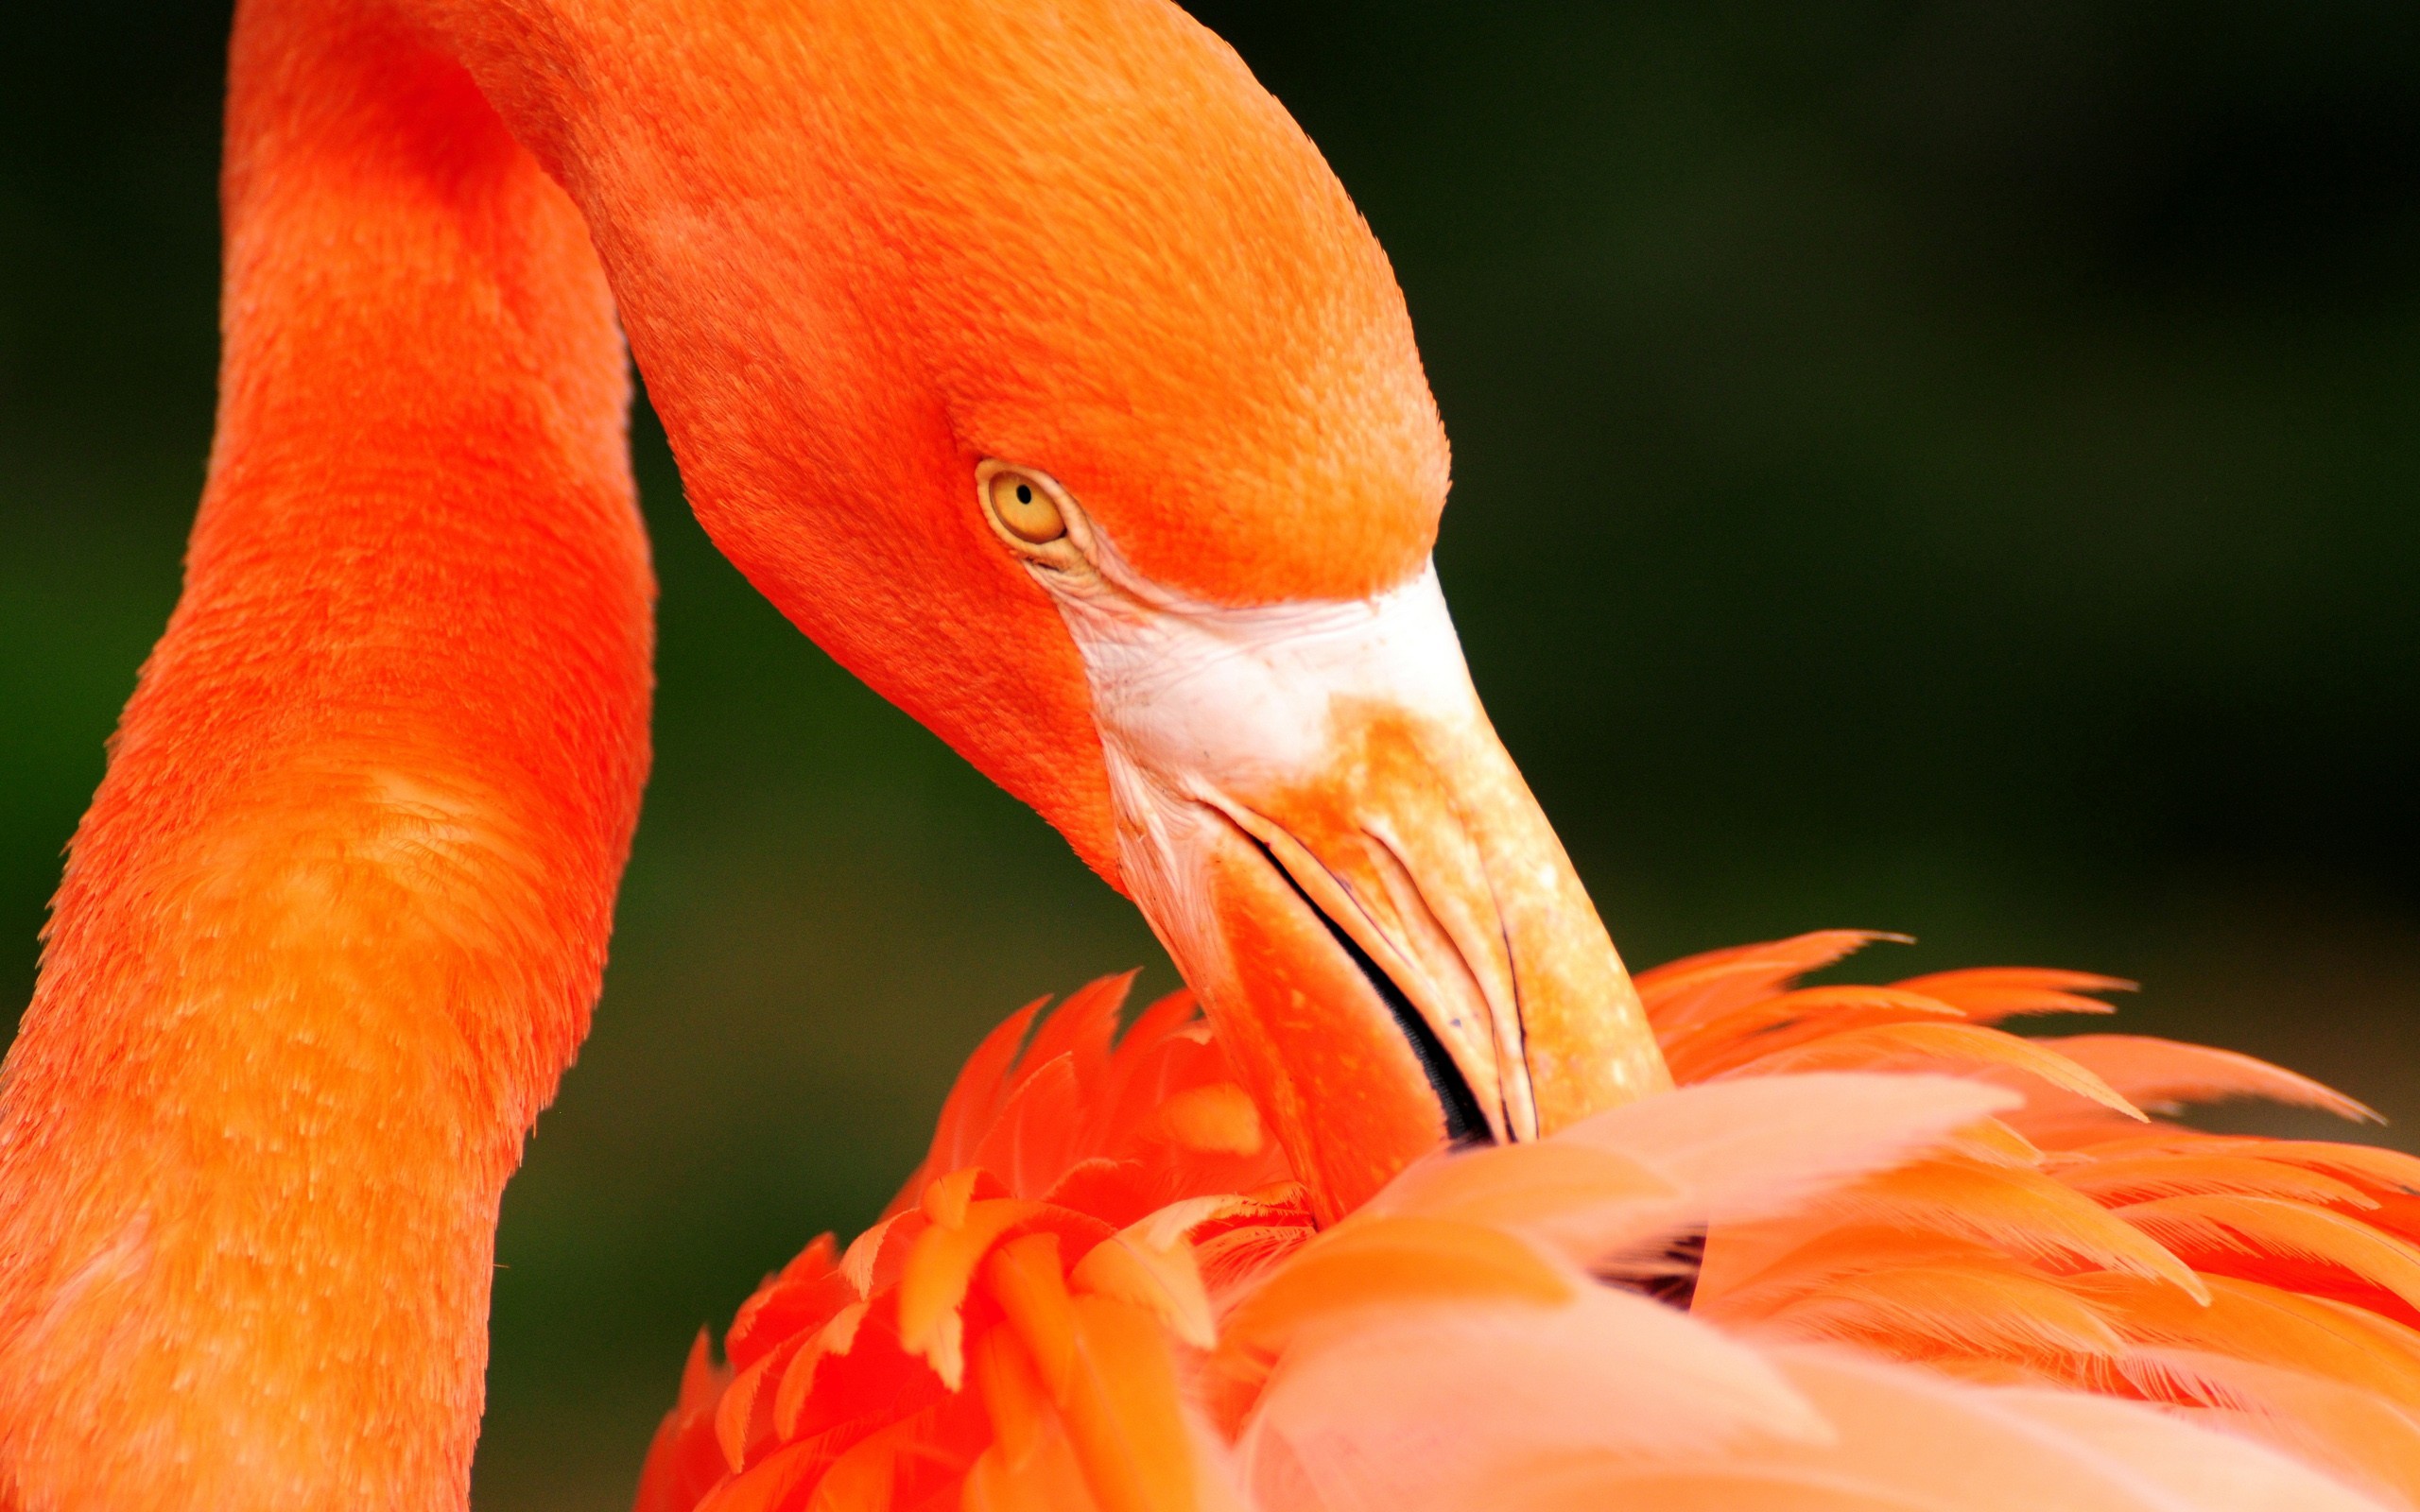 Orange flamingo wallpapers and images - wallpapers, pictures, photos